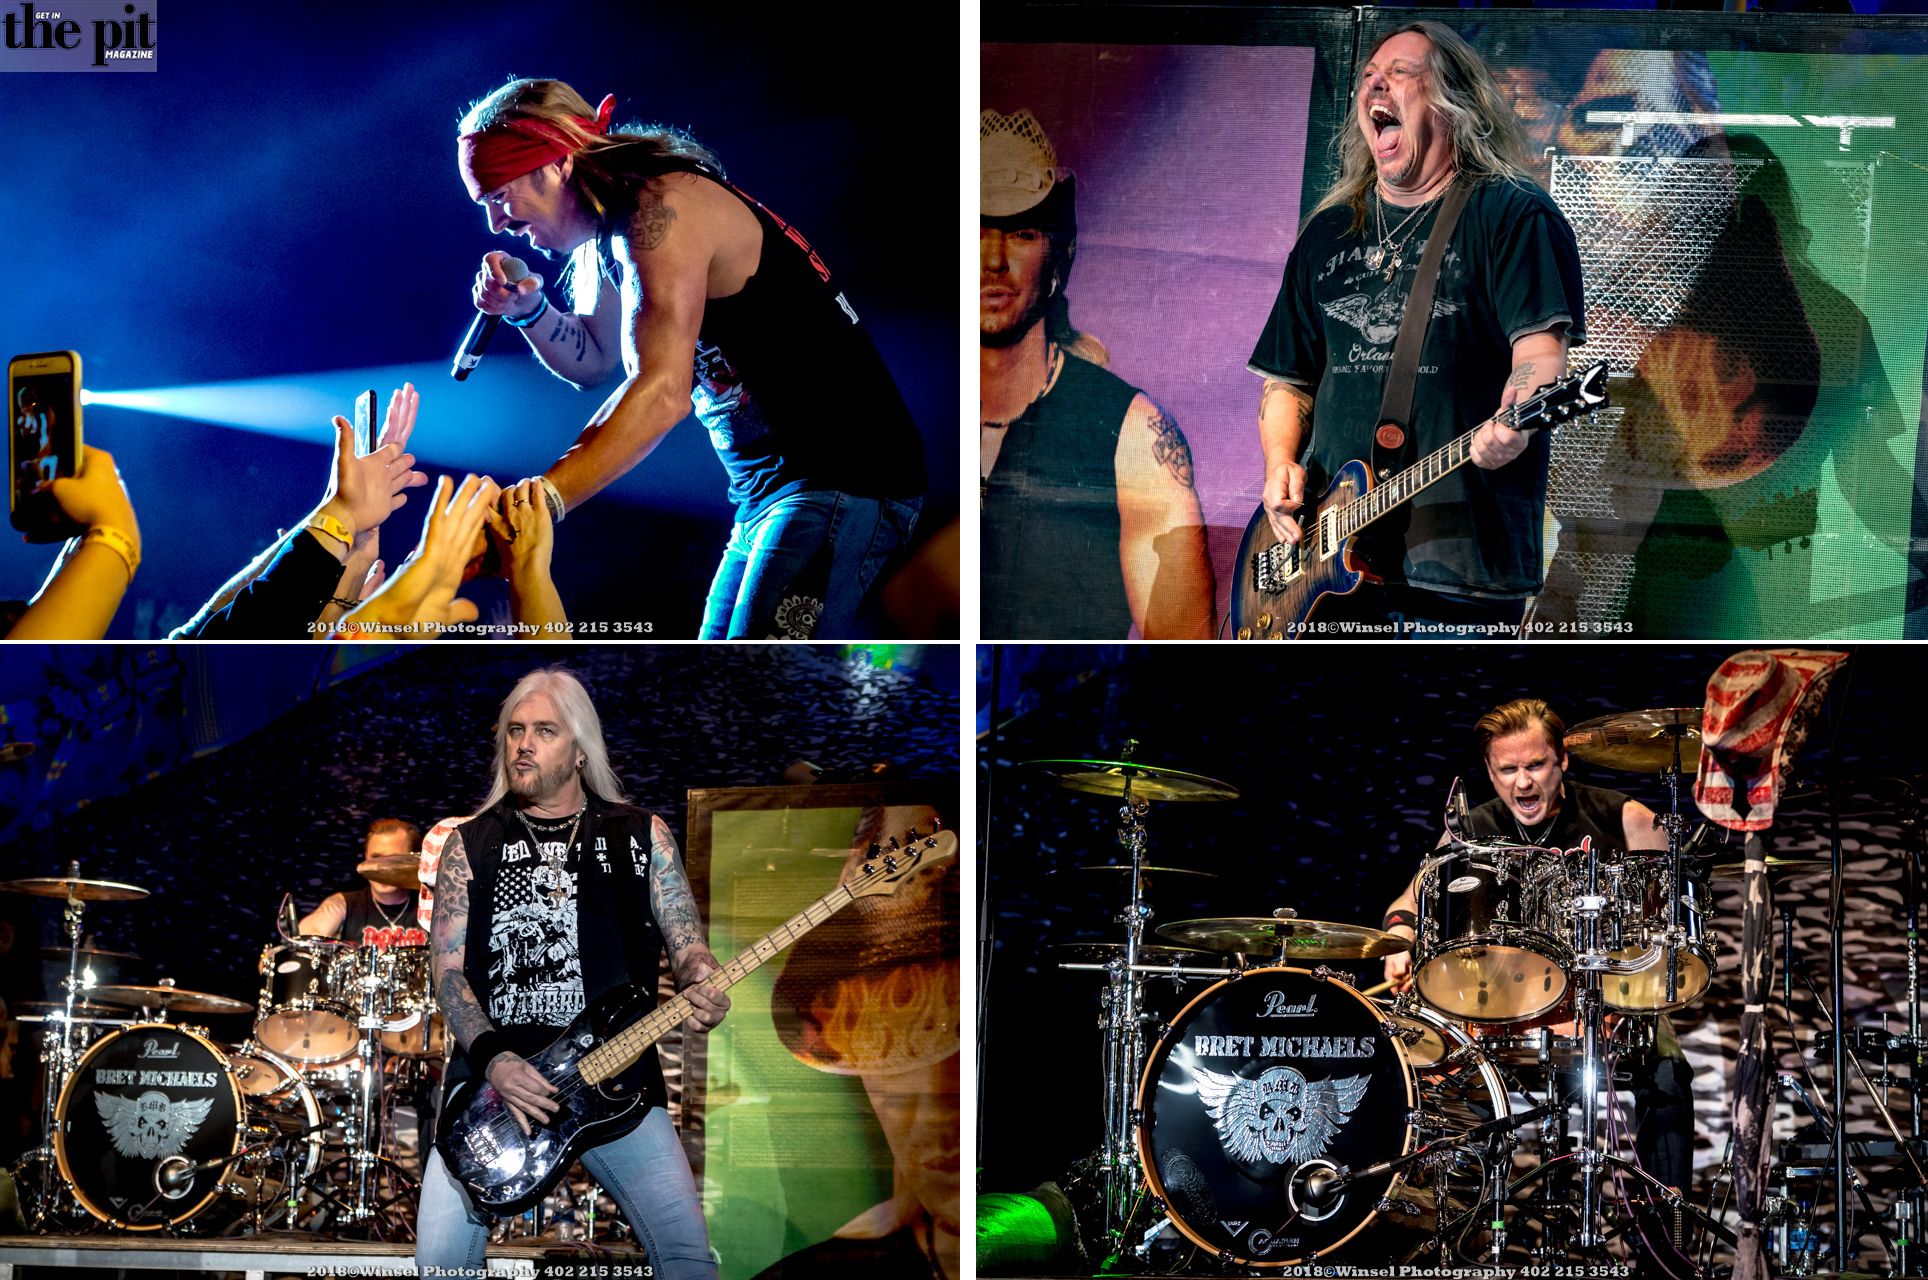 The Pit Magazine, Winsel Photography, Bret Michaels, Pete Evick, Eric Brittingham, Mike Bailey, MidAmerica Center, Council Bluffs, Iowa